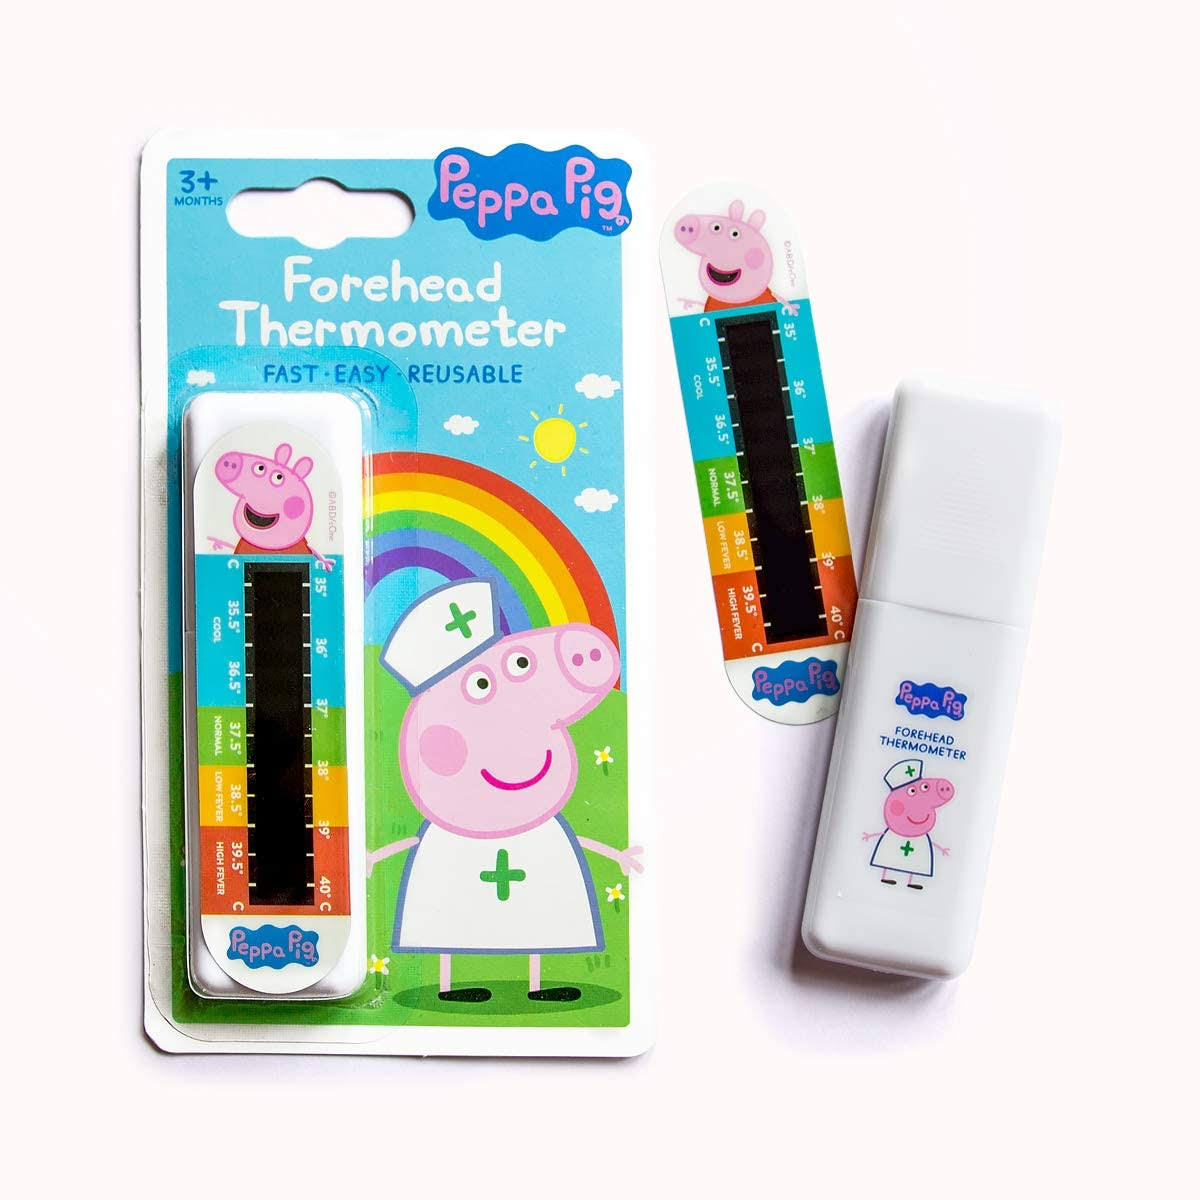 Peppa Pig Forehead Thermometers - Ages 3+